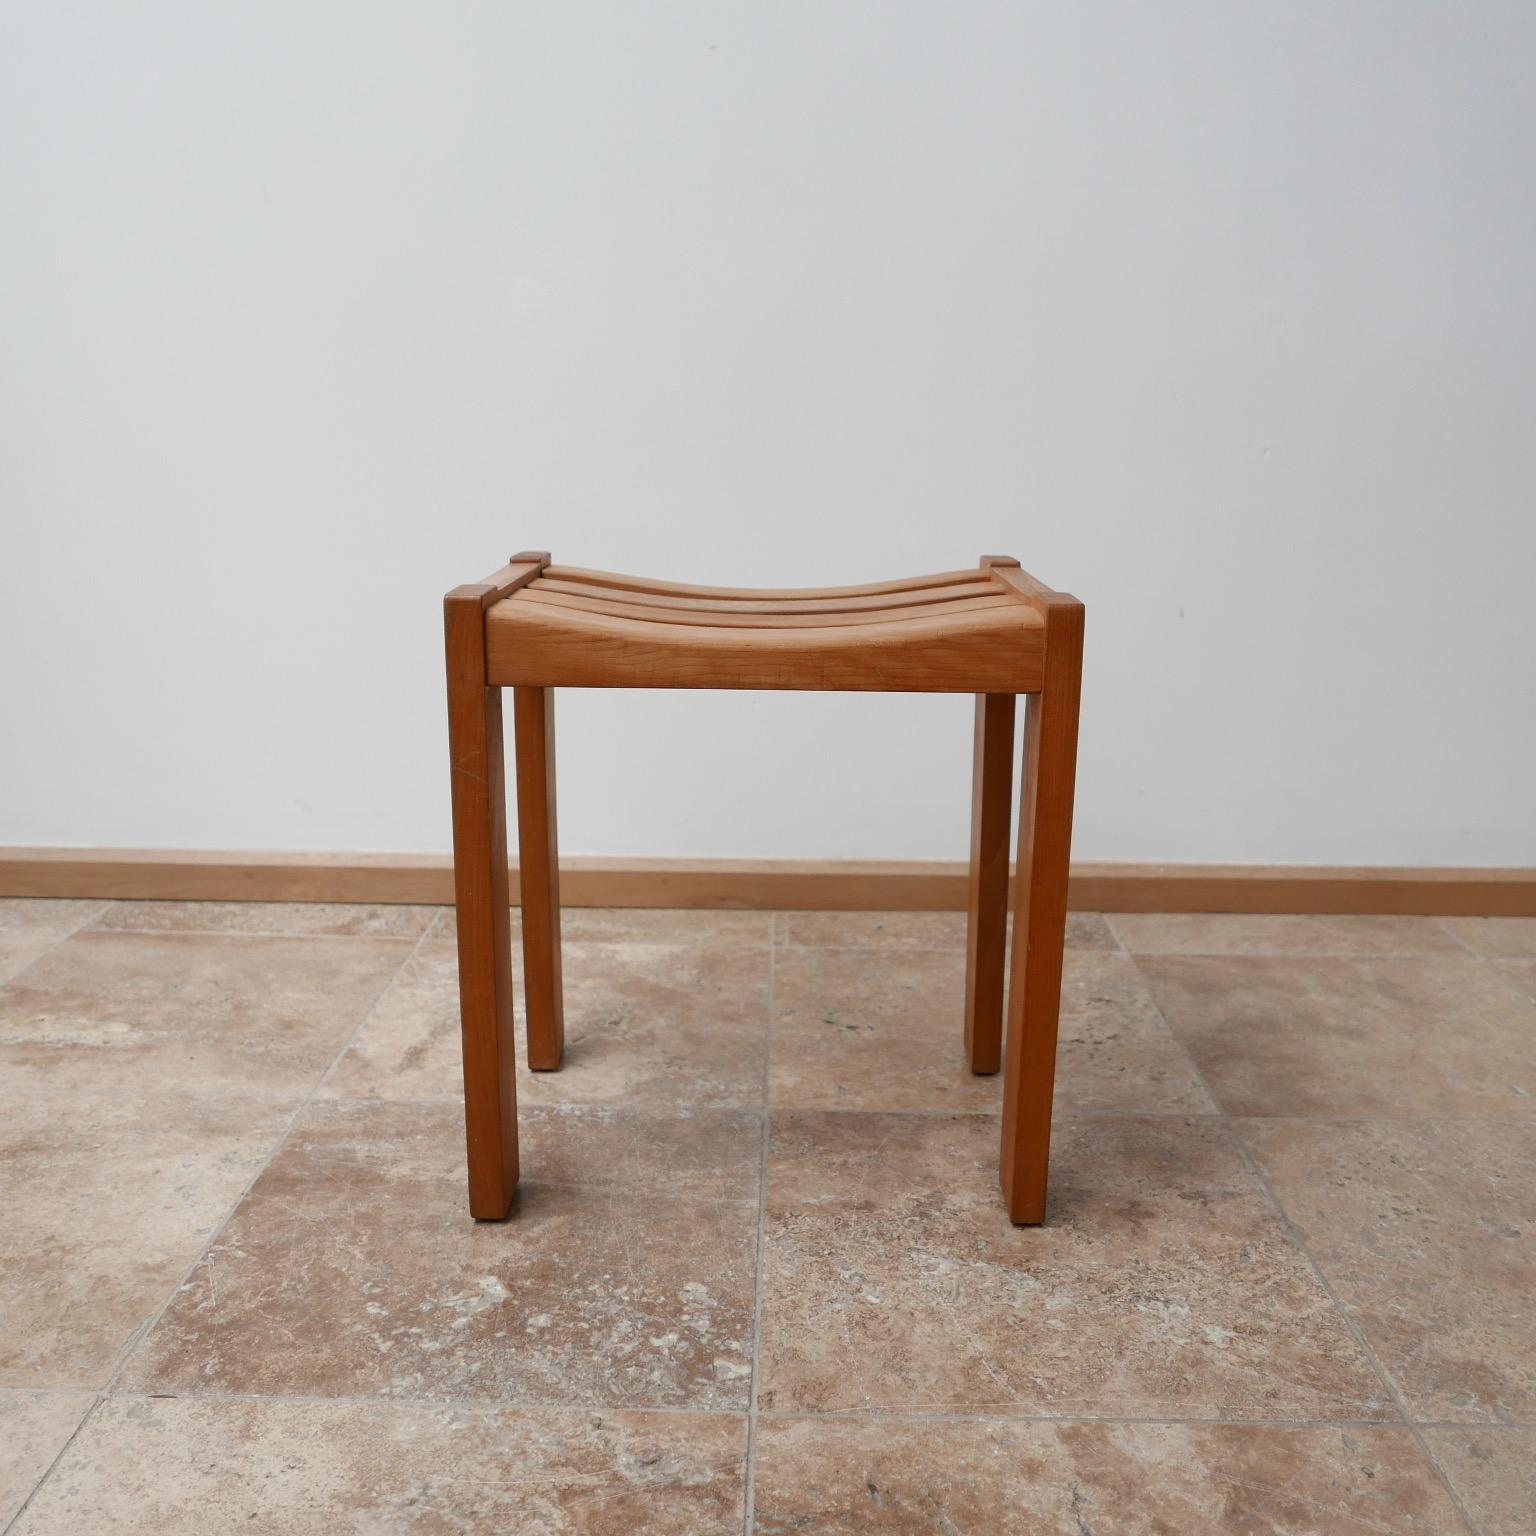 Midcentury French Blonde Oak Stools in the Manner of Guillerme et Chambron '11' For Sale 8